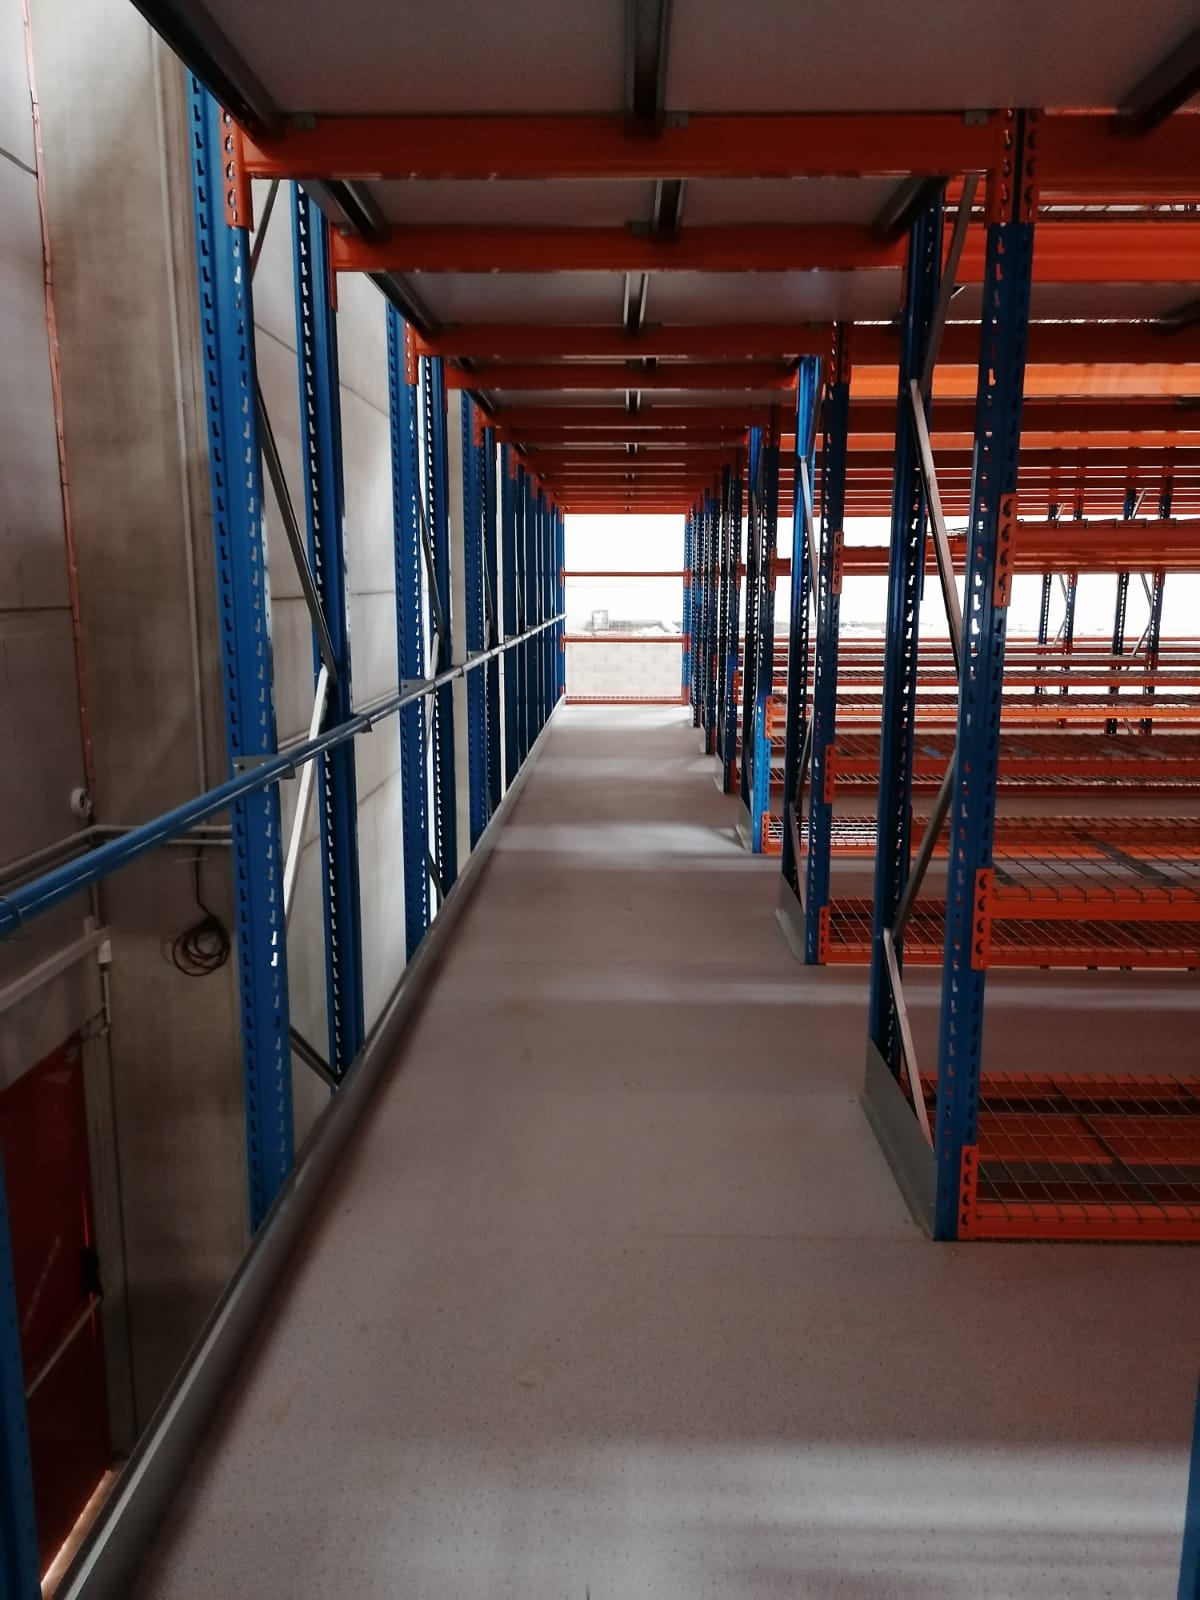 Mezza stow® solution in warehouse